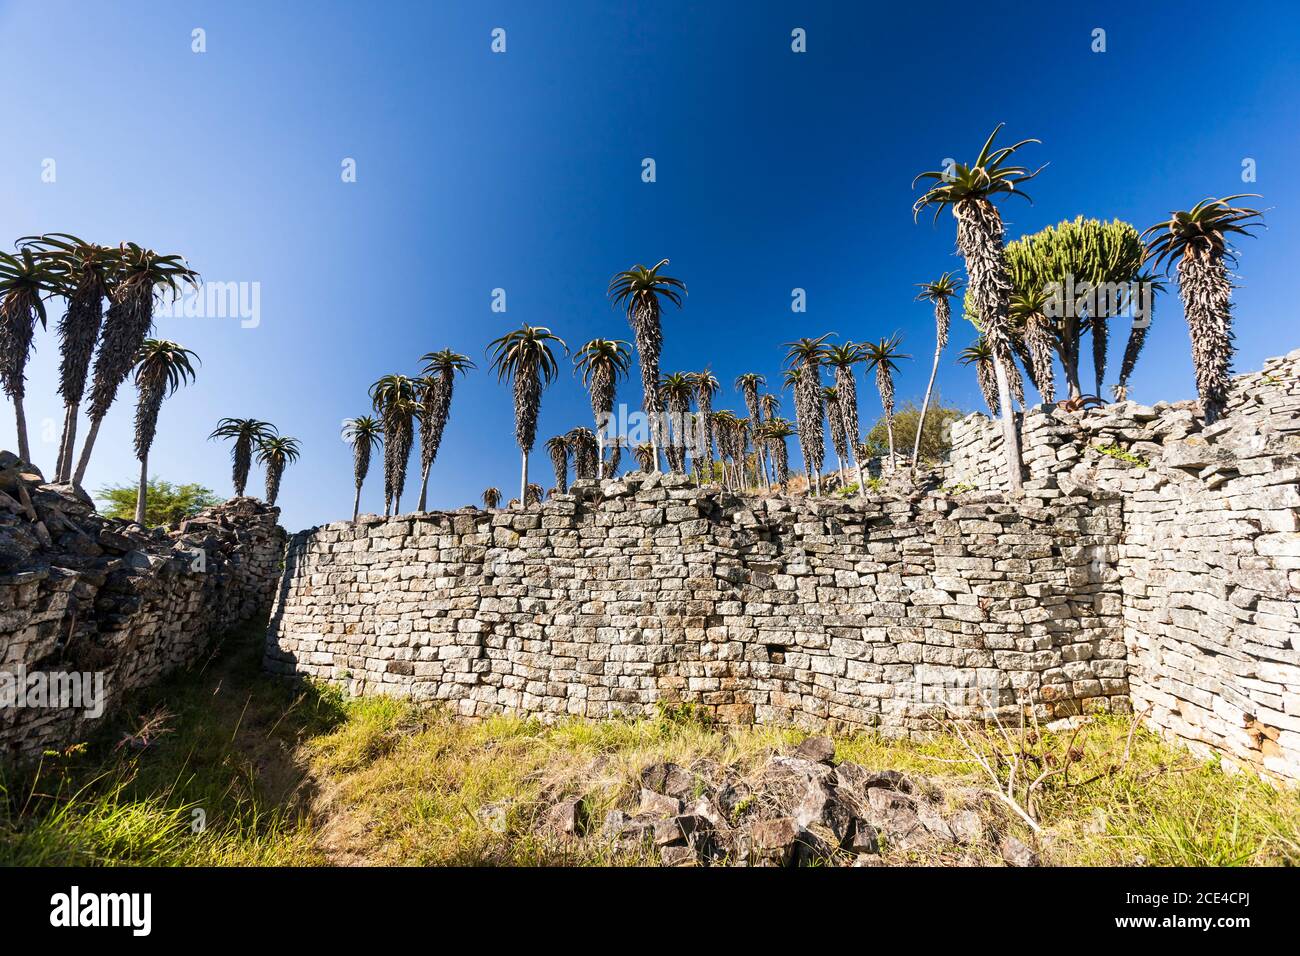 Great Zimbabwe ruins, stone structures of  'The Valley Complex' and aloes, ancient capital of Bantu civilization, Masvingo Province, Zimbabwe, Africa Stock Photo